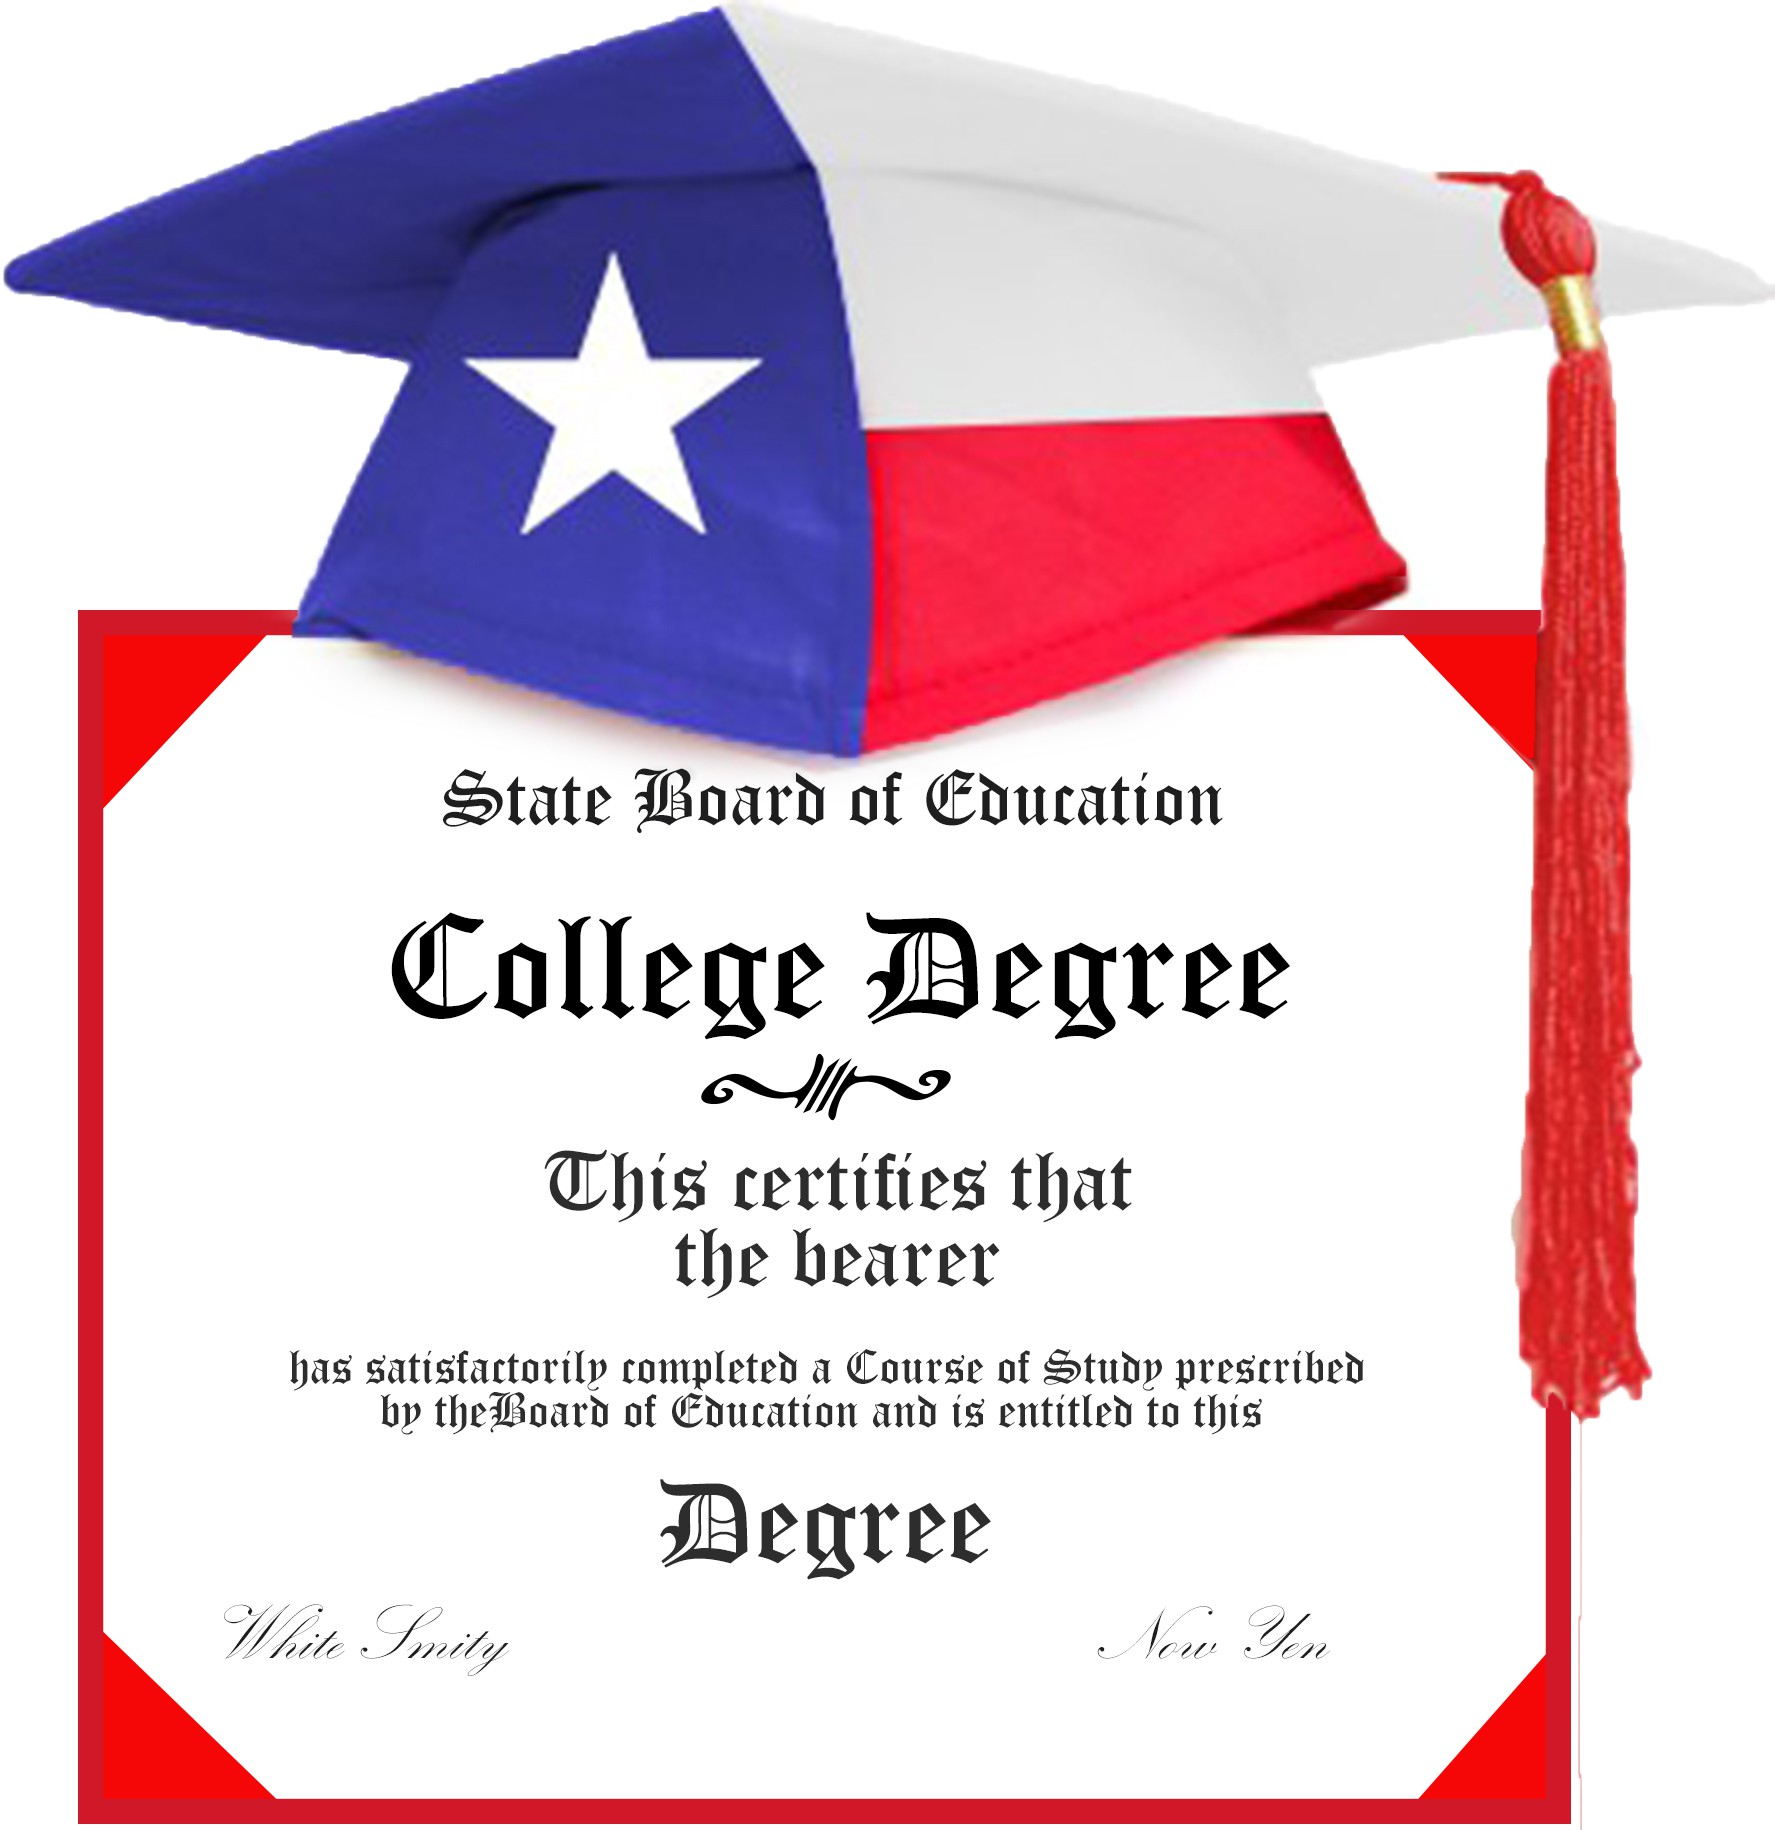 Criswell College Degree